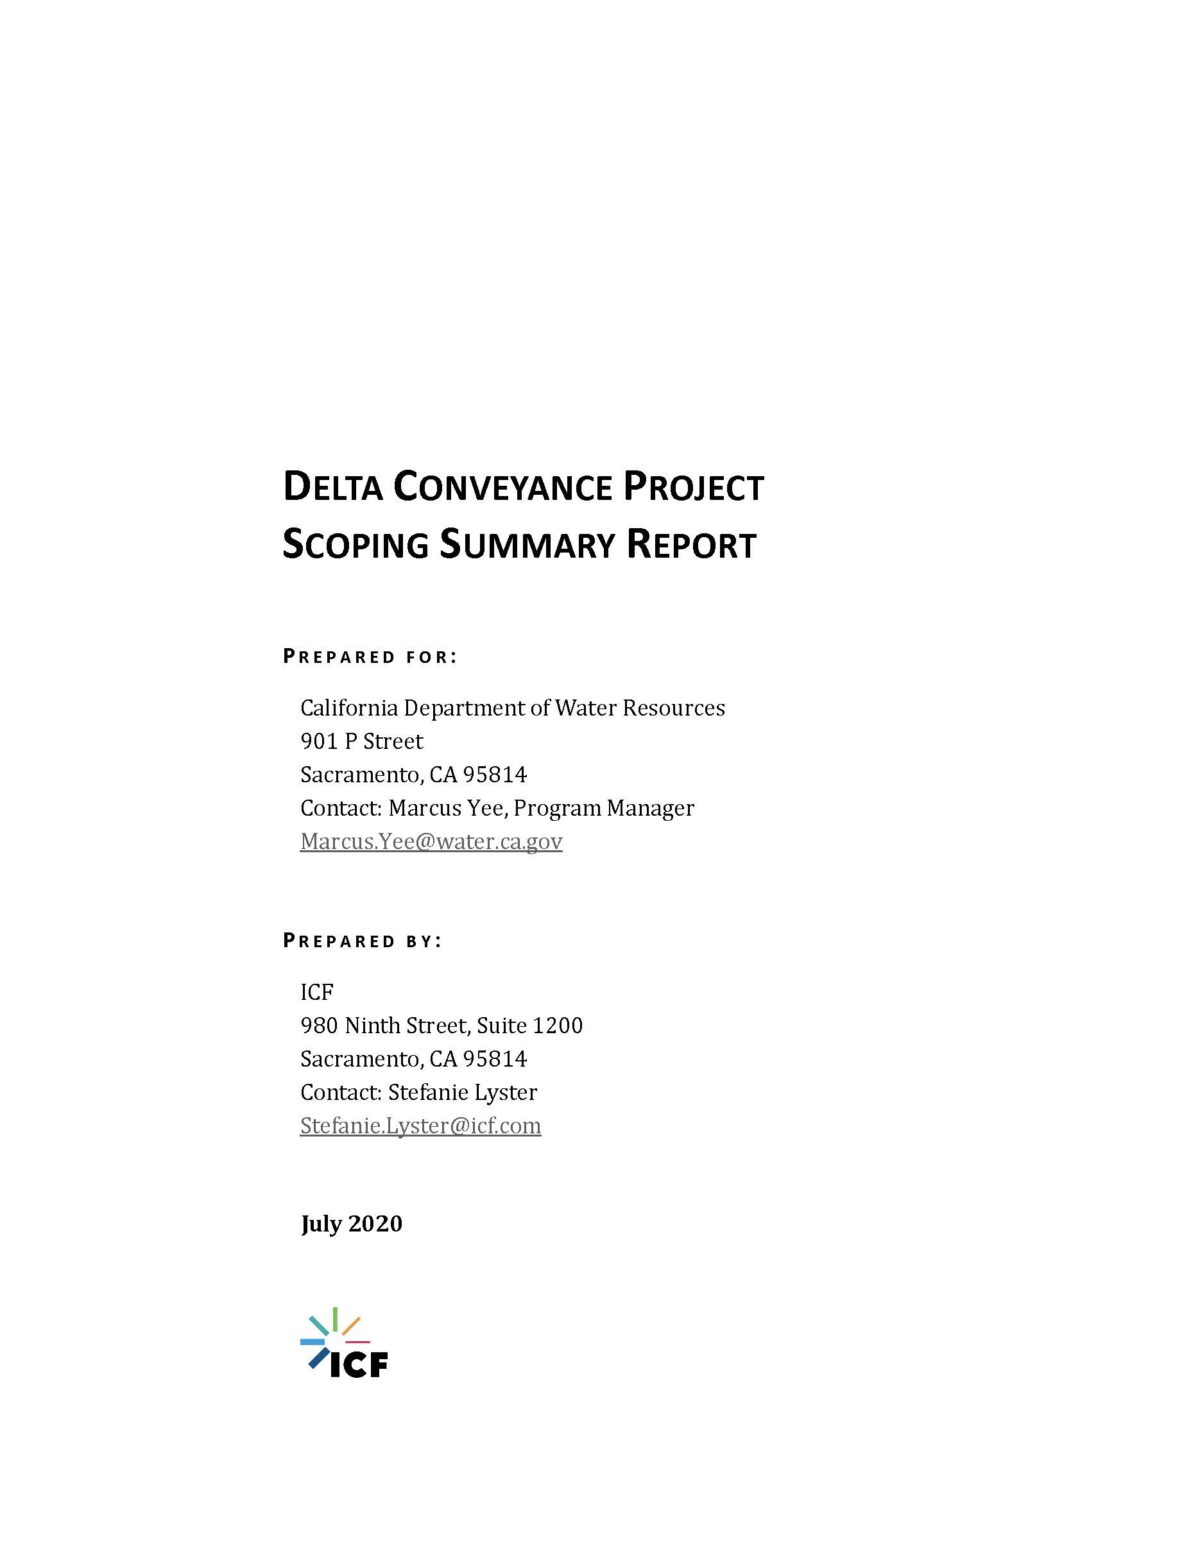 Delta Conveyance Project Scoping Summary Report